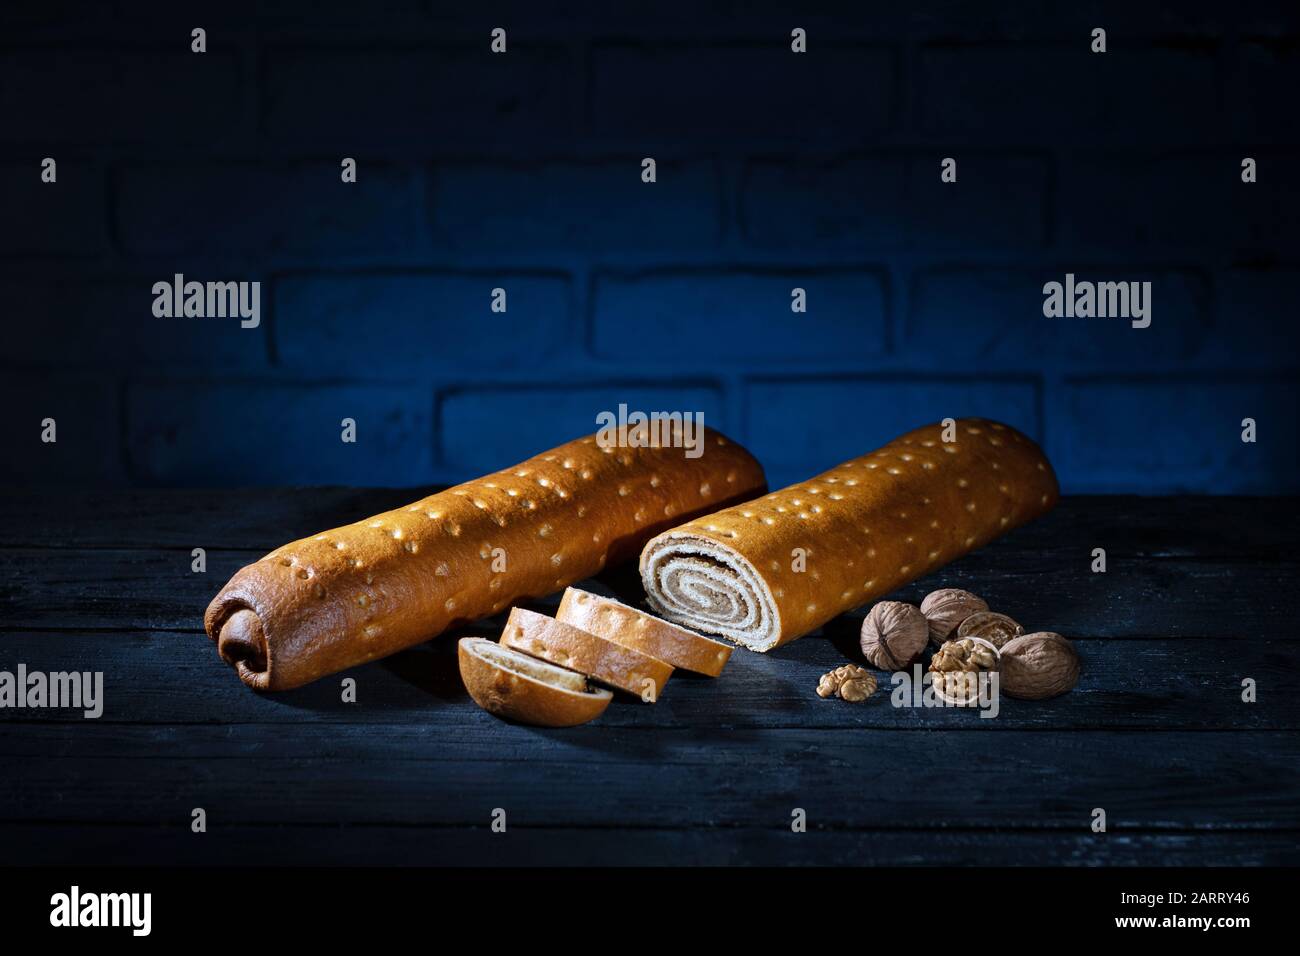 German sweet bread with walnut on burnt wooden table with blue brick background Stock Photo